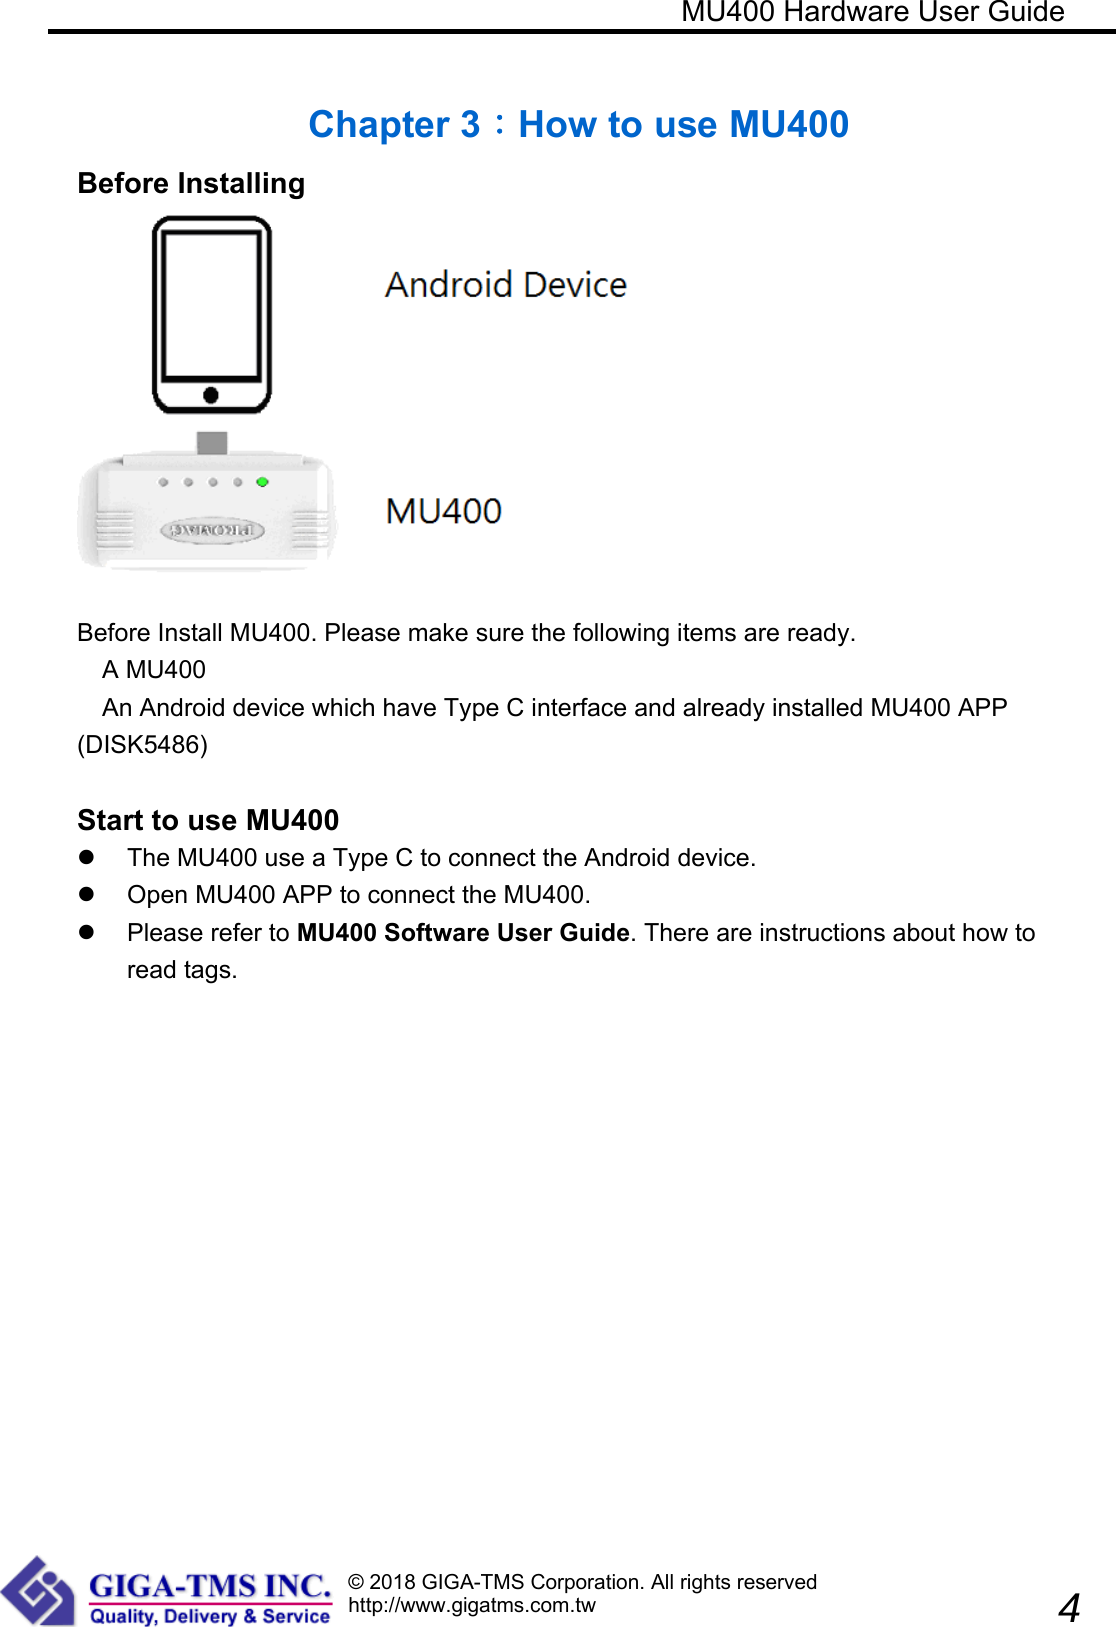 © 2018 GIGA-TMS Corporation. All rights reservedhttp://www.gigatms.com.tw                                                            MU400 Hardware User Guide               4  Chapter 3：How to use MU400 Before Installing   Before Install MU400. Please make sure the following items are ready. A MU400 An Android device which have Type C interface and already installed MU400 APP (DISK5486)    Start to use MU400   The MU400 use a Type C to connect the Android device.   Open MU400 APP to connect the MU400.   Please refer to MU400 Software User Guide. There are instructions about how to read tags.   